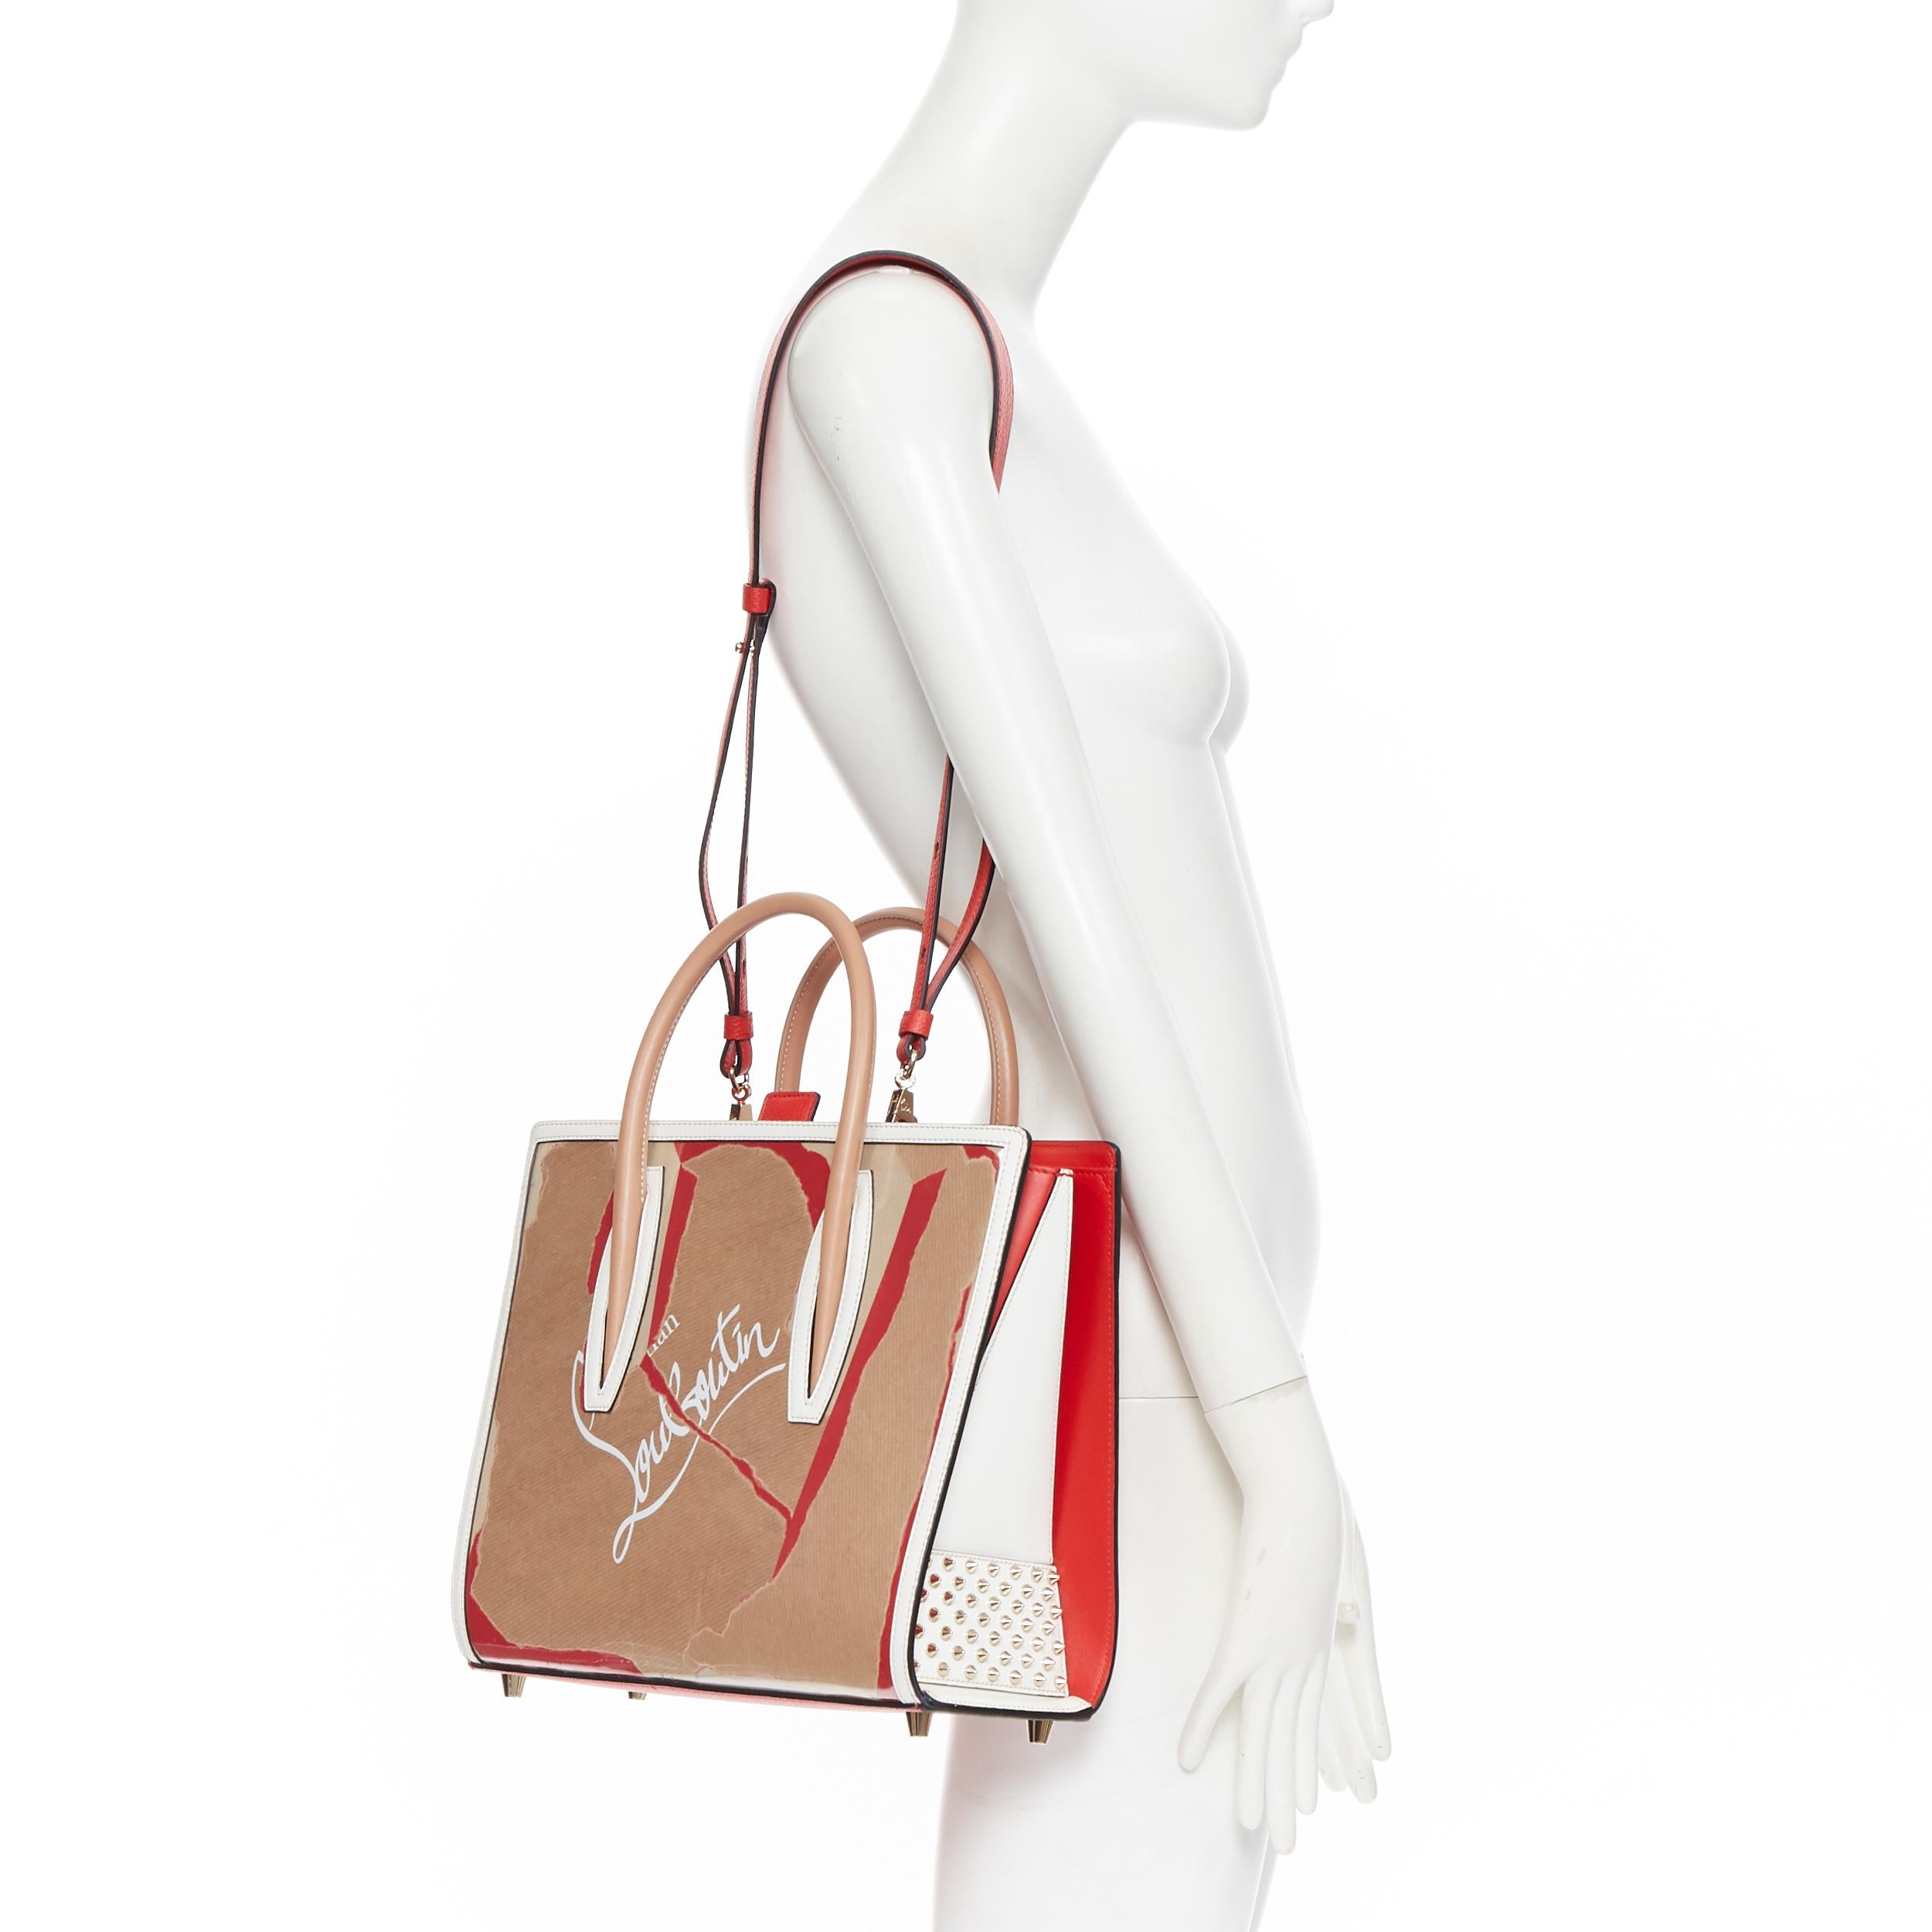 new CHRISTIAN LOUBOUTIN Paloma Kraft PVC paper bag craft medium satchel tote bag
Brand: Christian Louboutin
Designer: Christian Louboutin
Model Name / Style: Paloma
Material: PVC
Color: Brown
Pattern: Abstract
Extra Detail: Laminated Christian